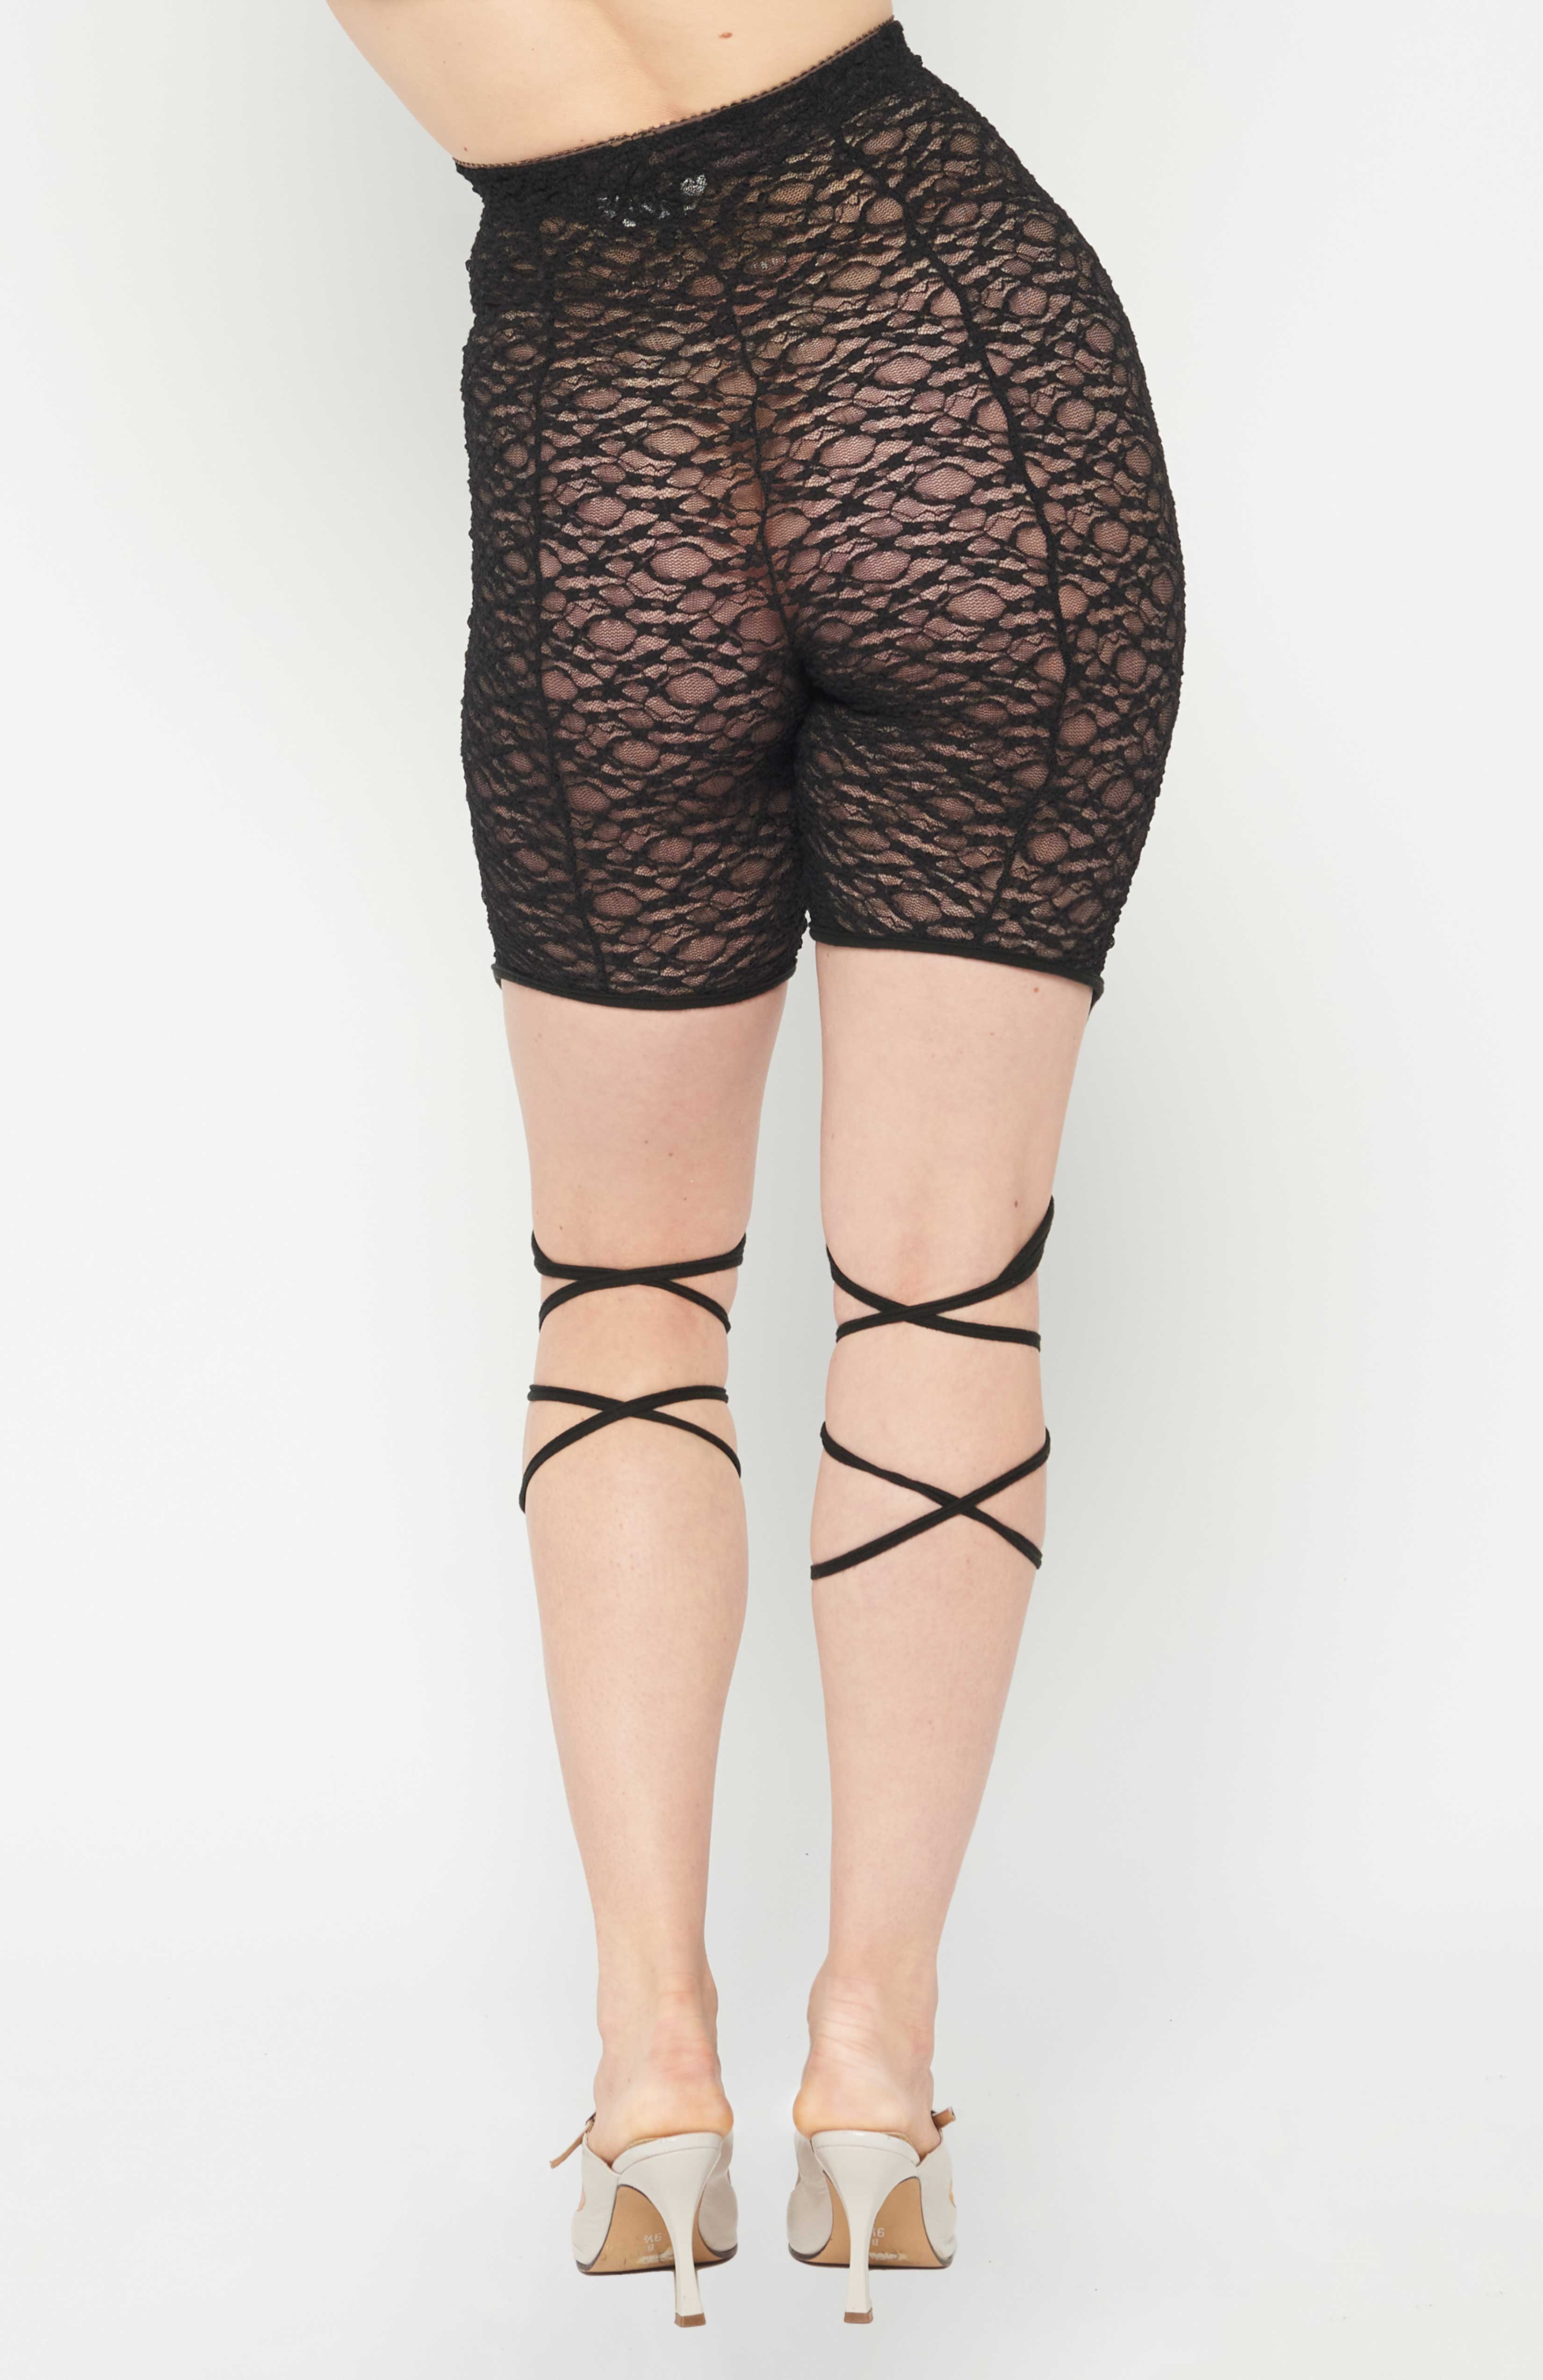 Maroske Peech High waisted black lace leggings with tendrils that grow from the knee. A spell is cast when these tendrils are wrapped around your legs and tied. Super comfortable and stretchy with a brushed elastic waistband.